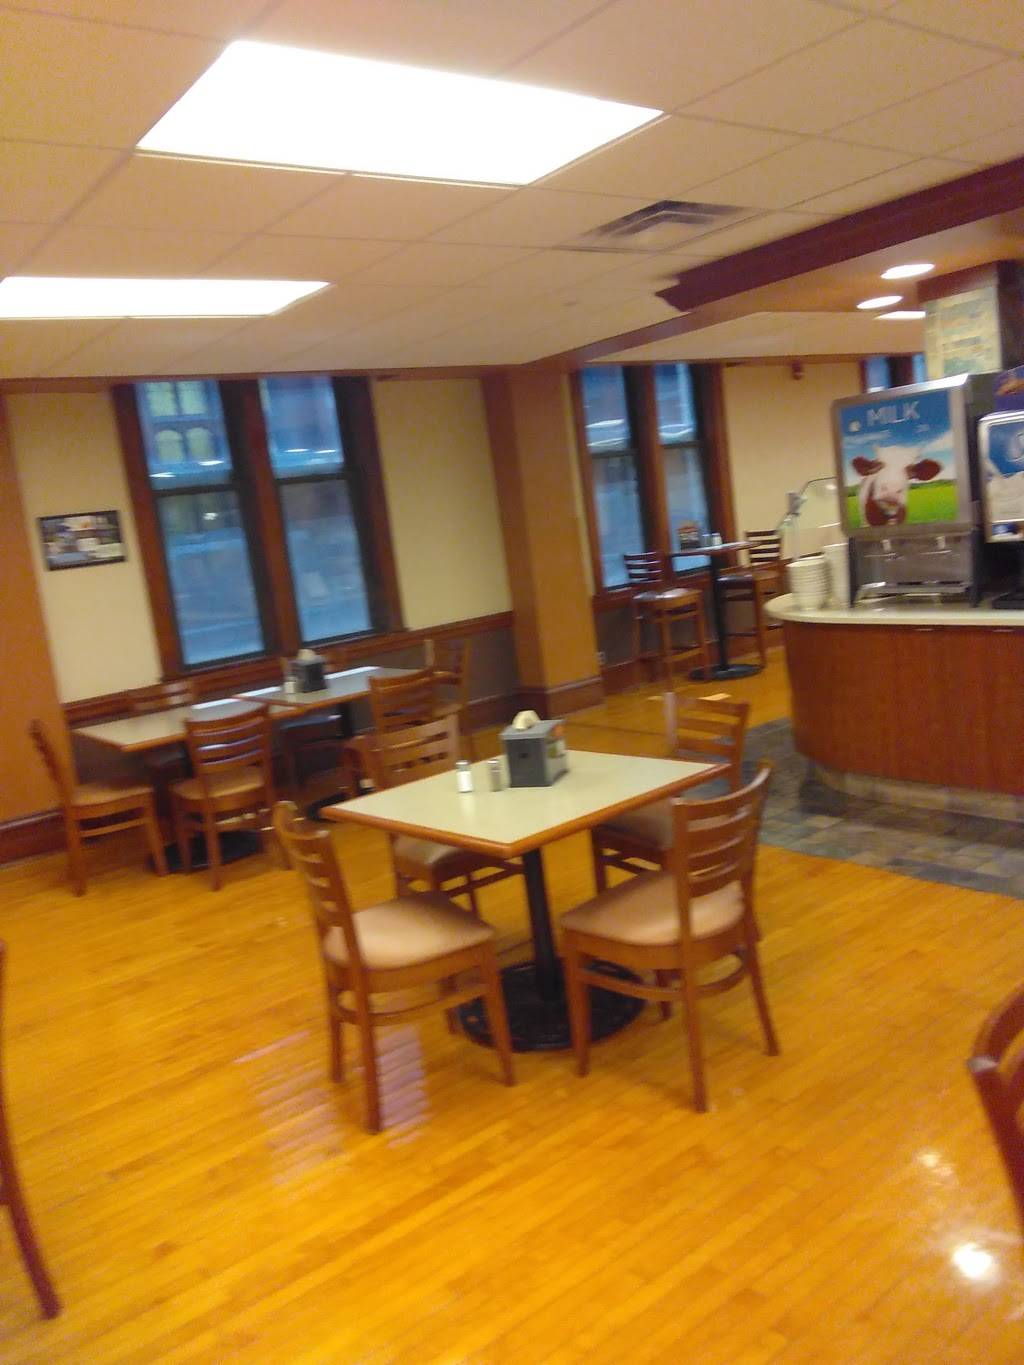 Provincial House Dining Hall | 2927 Laclede Ln, St. Louis, MO 63121 | Phone: (314) 516-7290